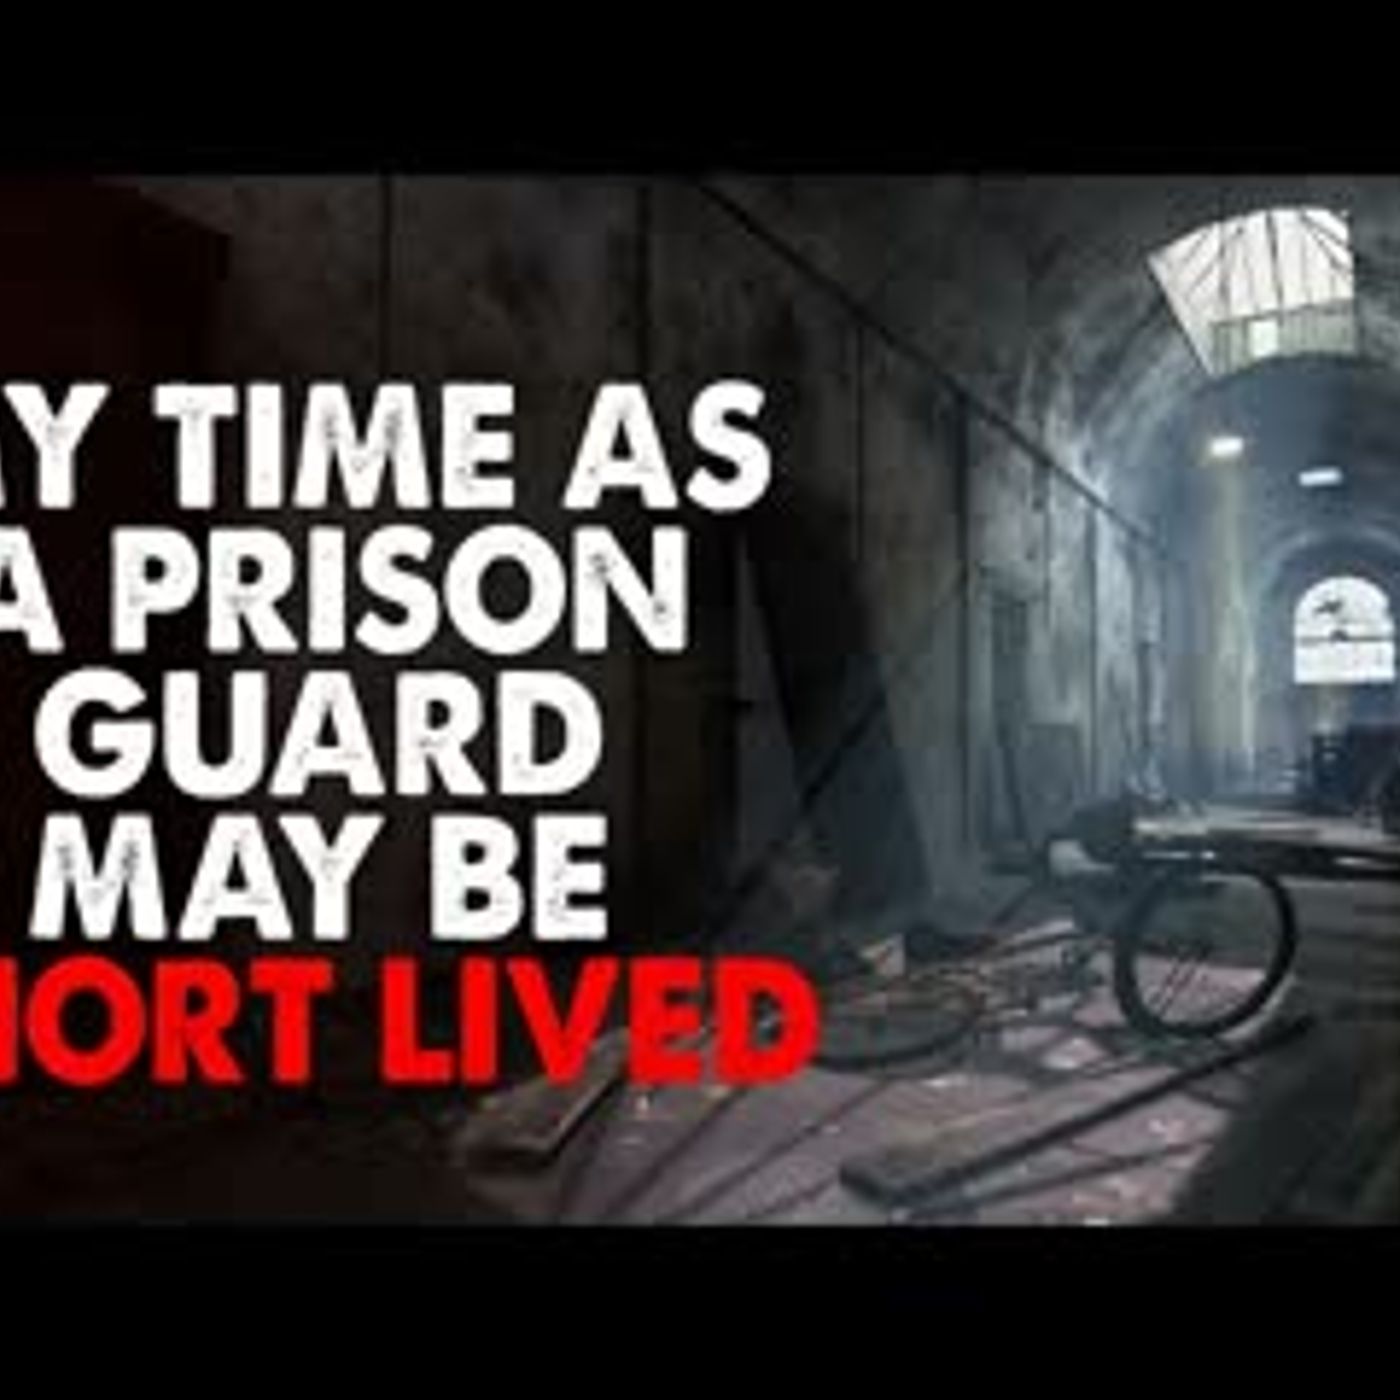 ”My time as a prison guard may be short lived” Creepypasta